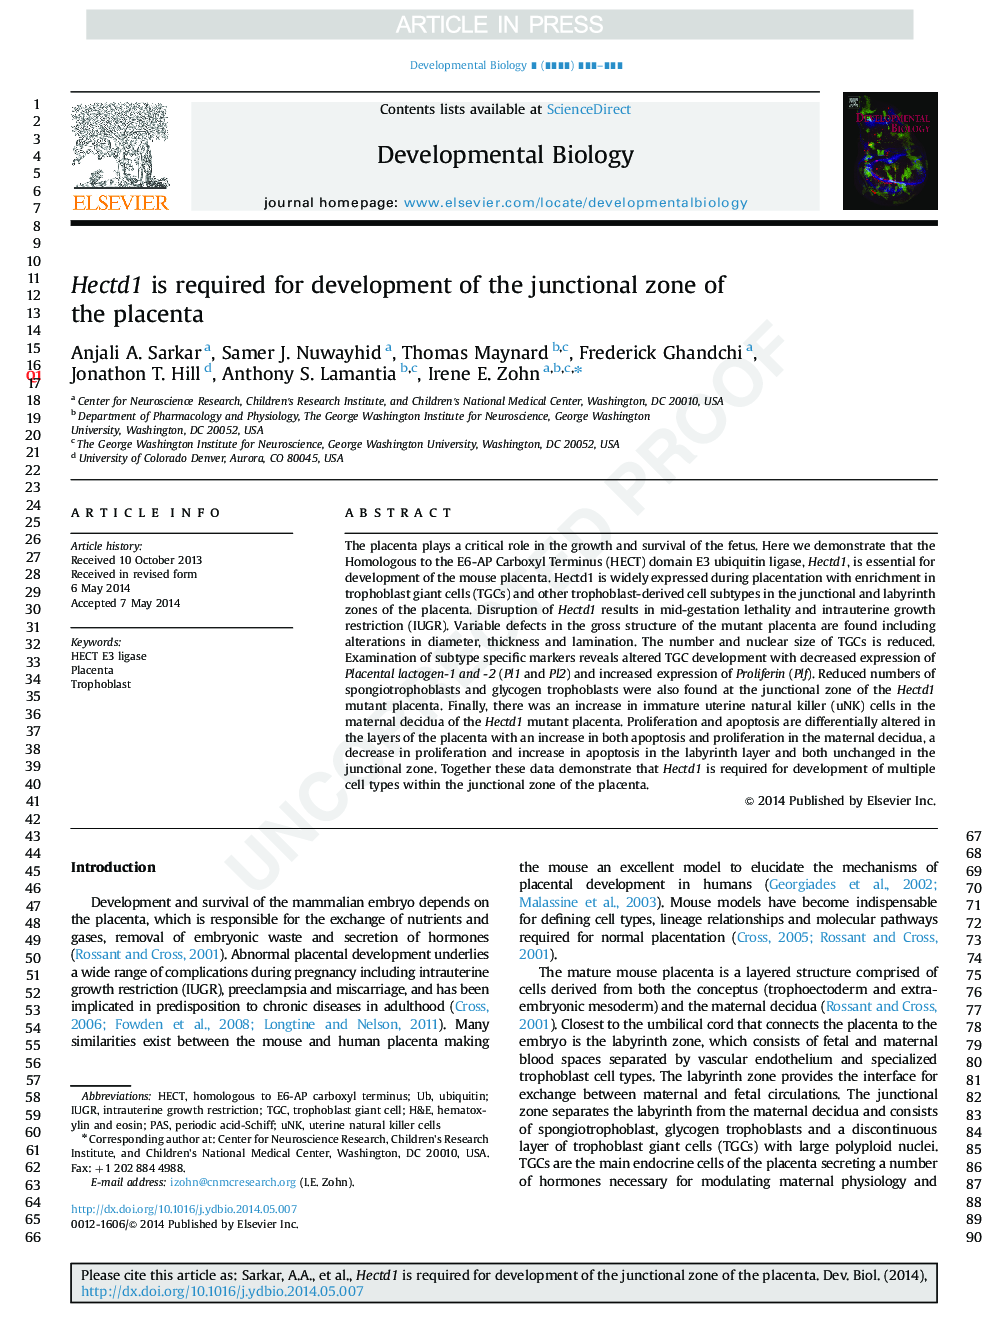 Hectd1 is required for development of the junctional zone of the placenta